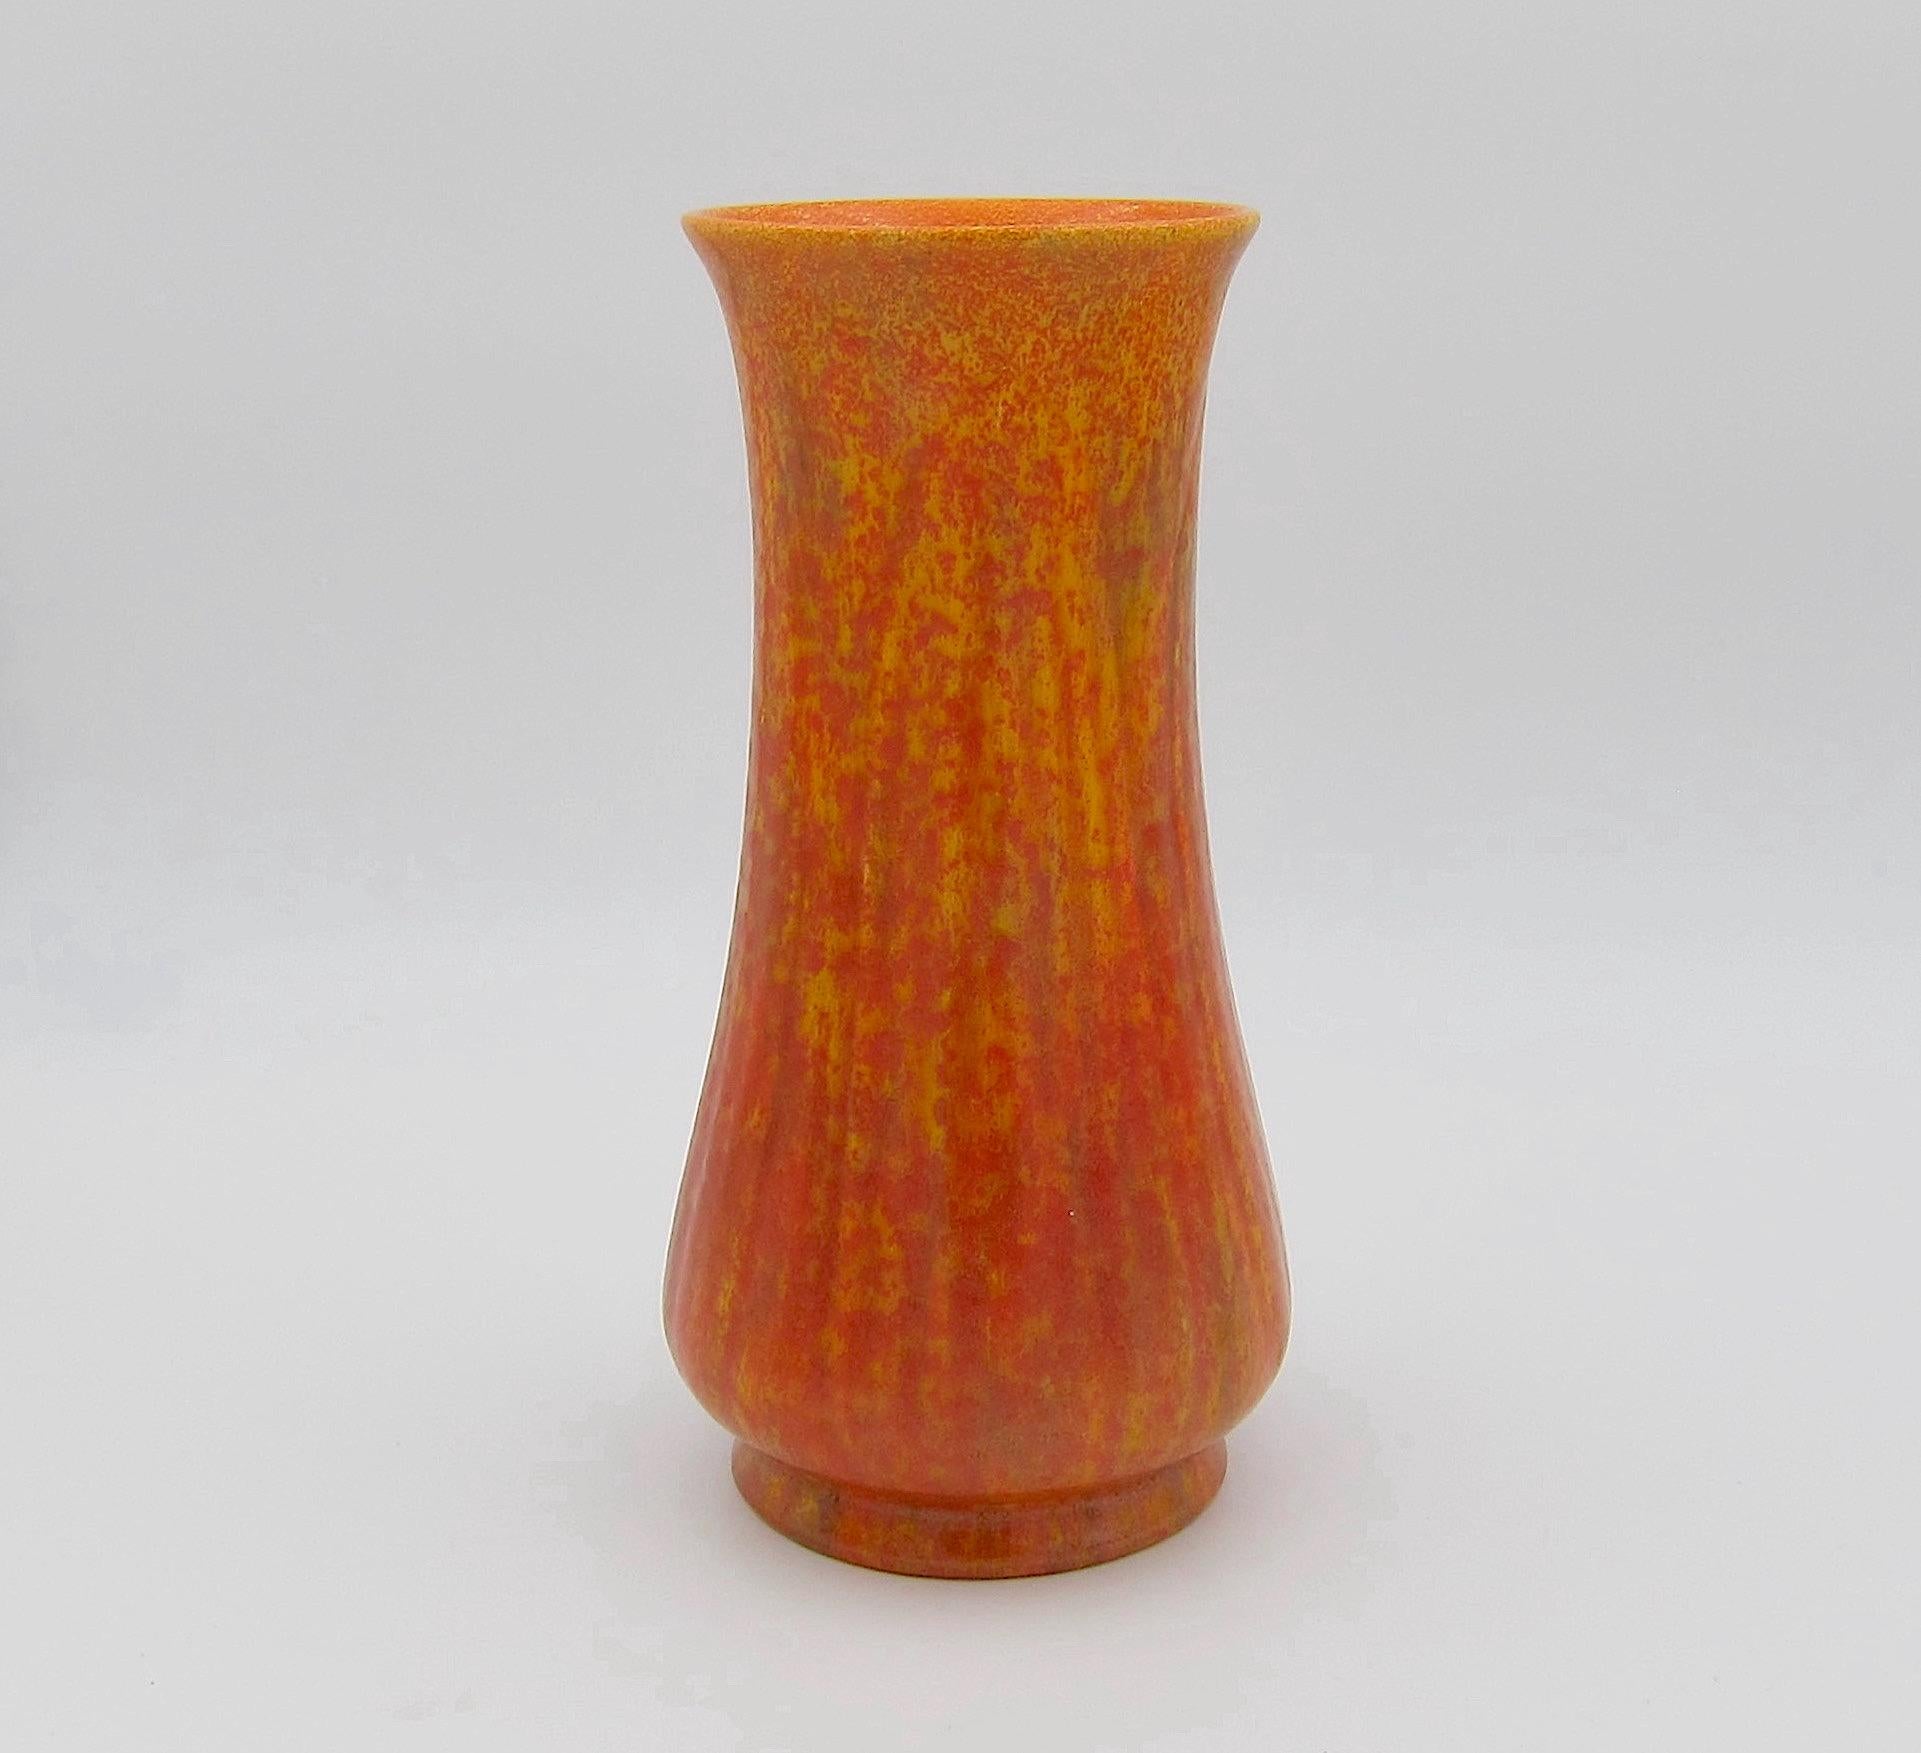 An English Royal Lancastrian art pottery vase made by Pilkingtons Tile and Pottery Co. Ltd., at Clifton Junction, circa 1920. The Art Deco vase is decorated with a mottled 